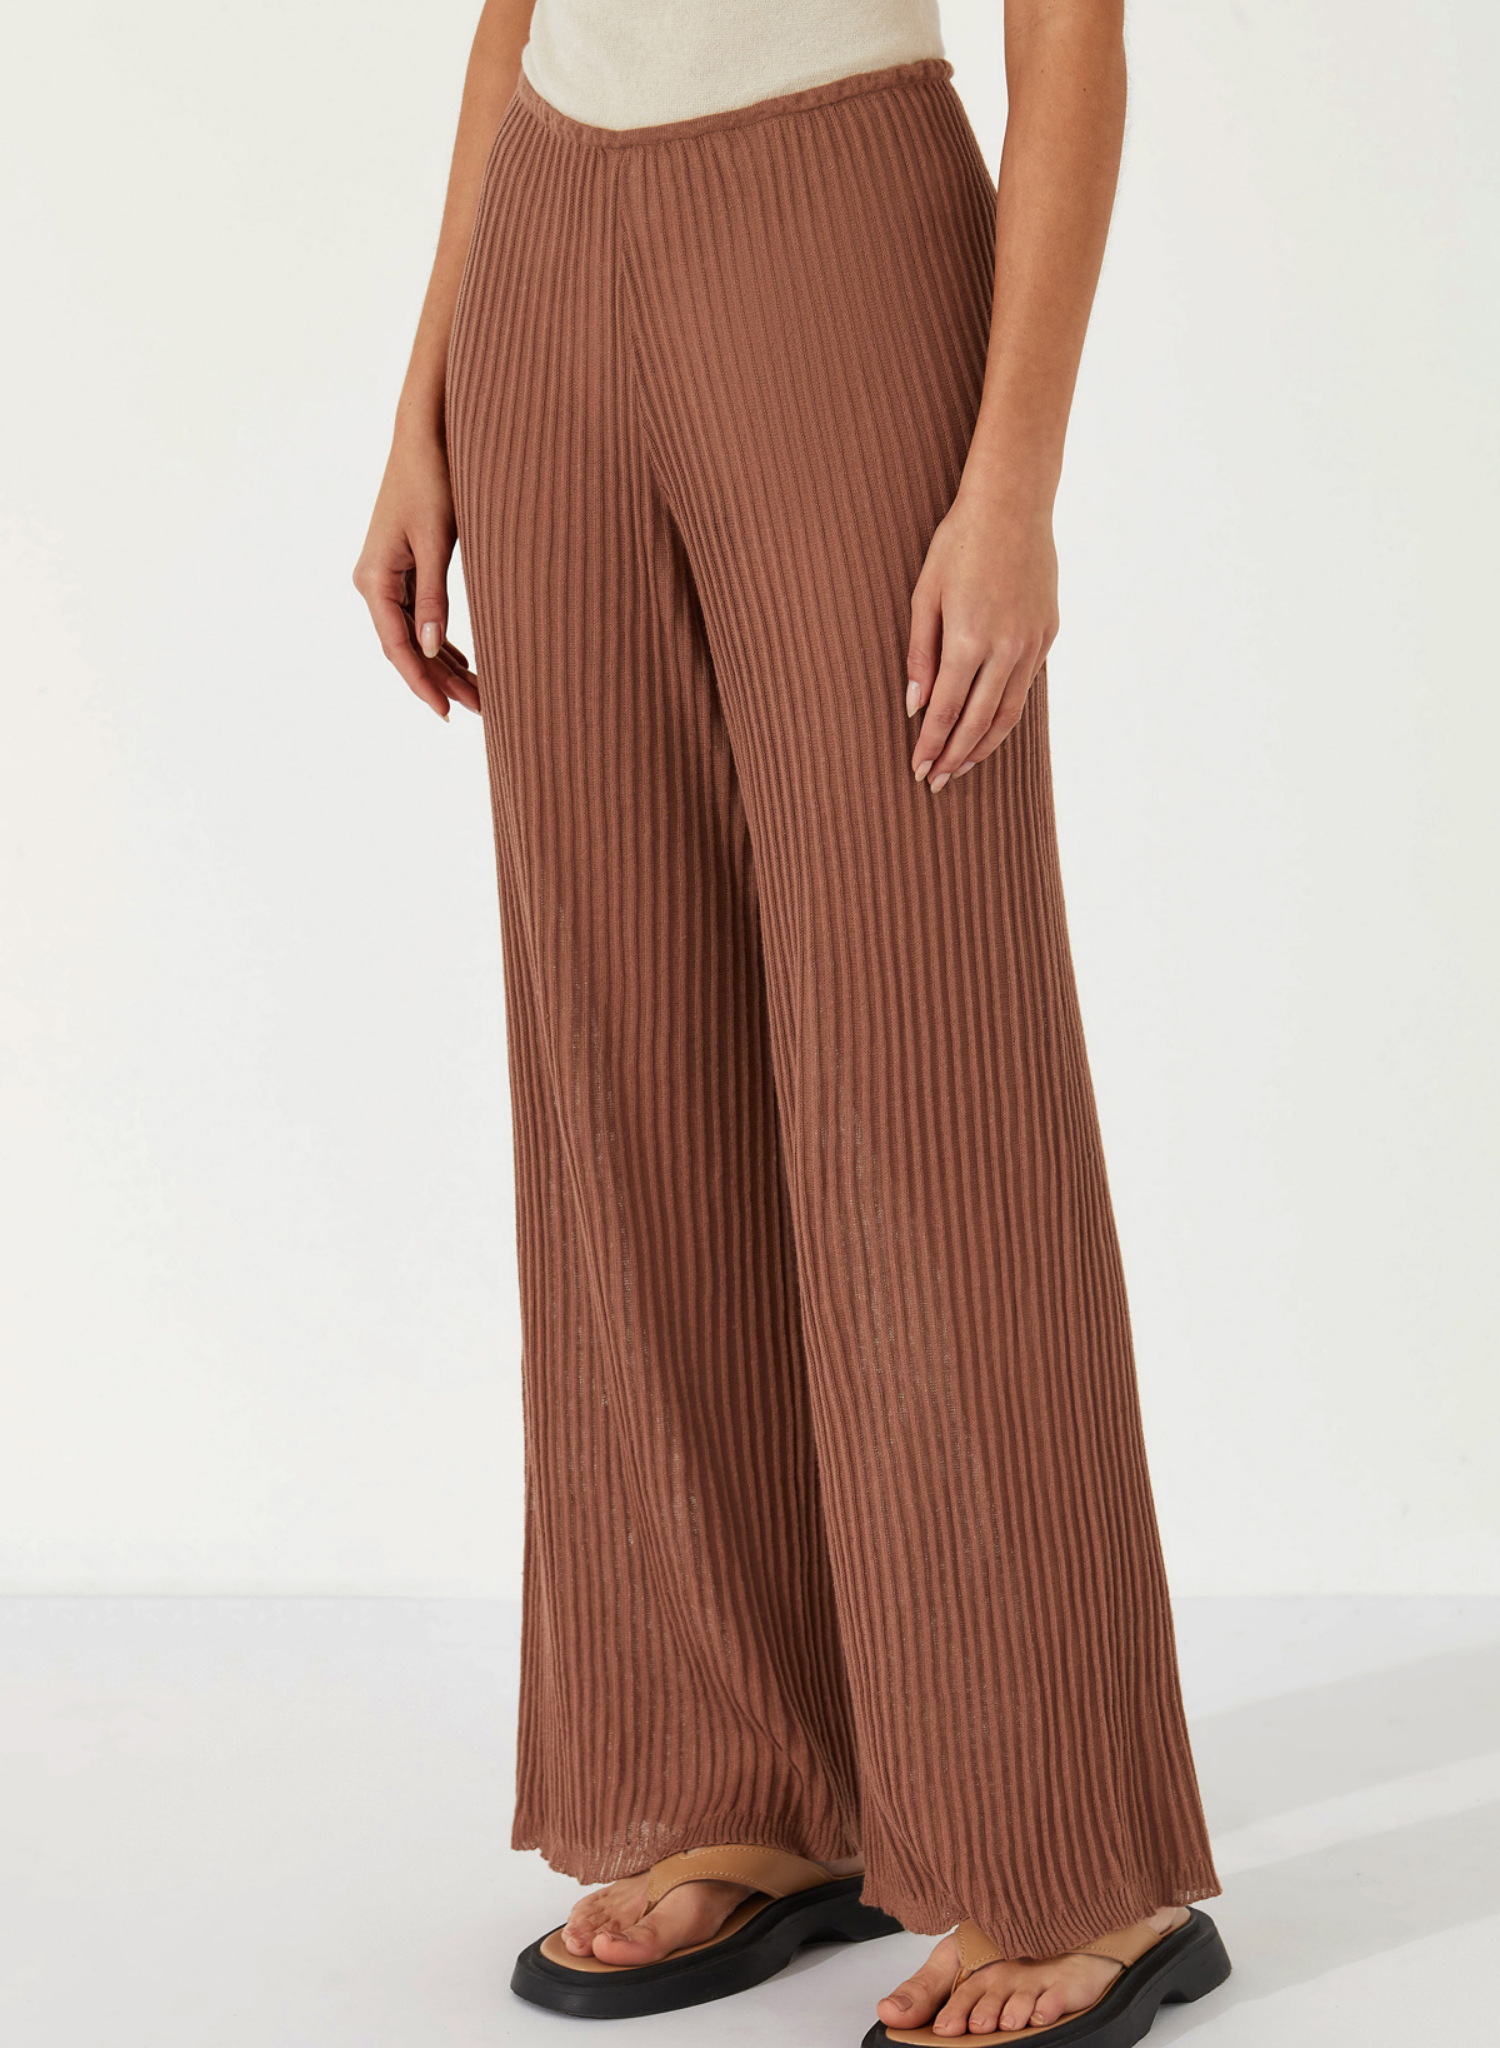 The Ribbed Knit Pant by Zulu & Zephyr is a soft sheer textured piece featuring a wide long leg and thin elasticated waistband for comfort and versatility with fit. Inspired by the drape of tactile cloth and soft organic forms, this transeasonal essential may be paired with the coordinating Ribbed Knit Top - Earth.